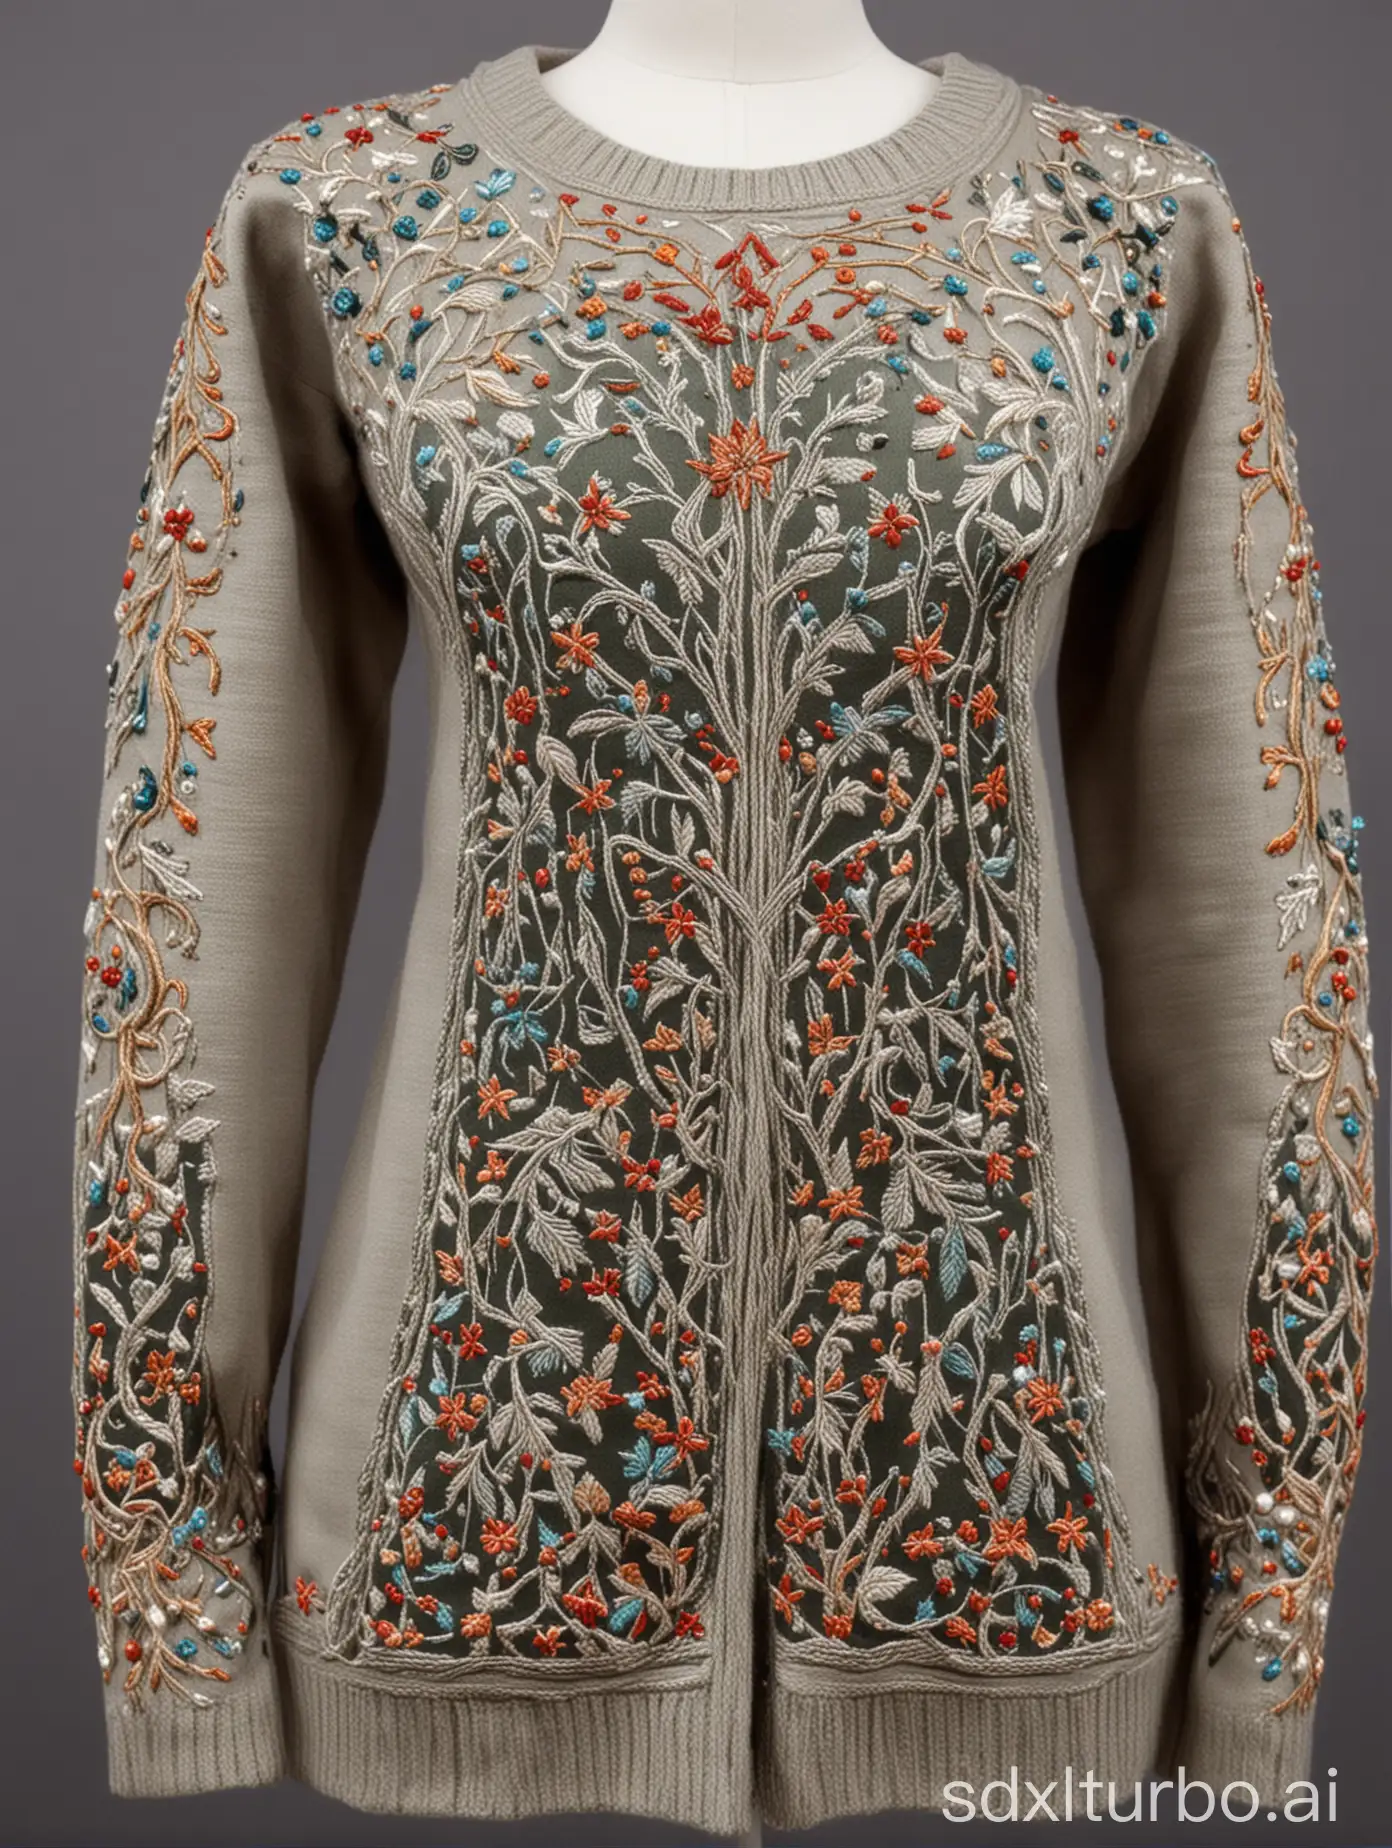 fashionable modern sweater decorated with embroidery in the style of the elves of Lotr, embroidered motifs of elven armor and ornaments